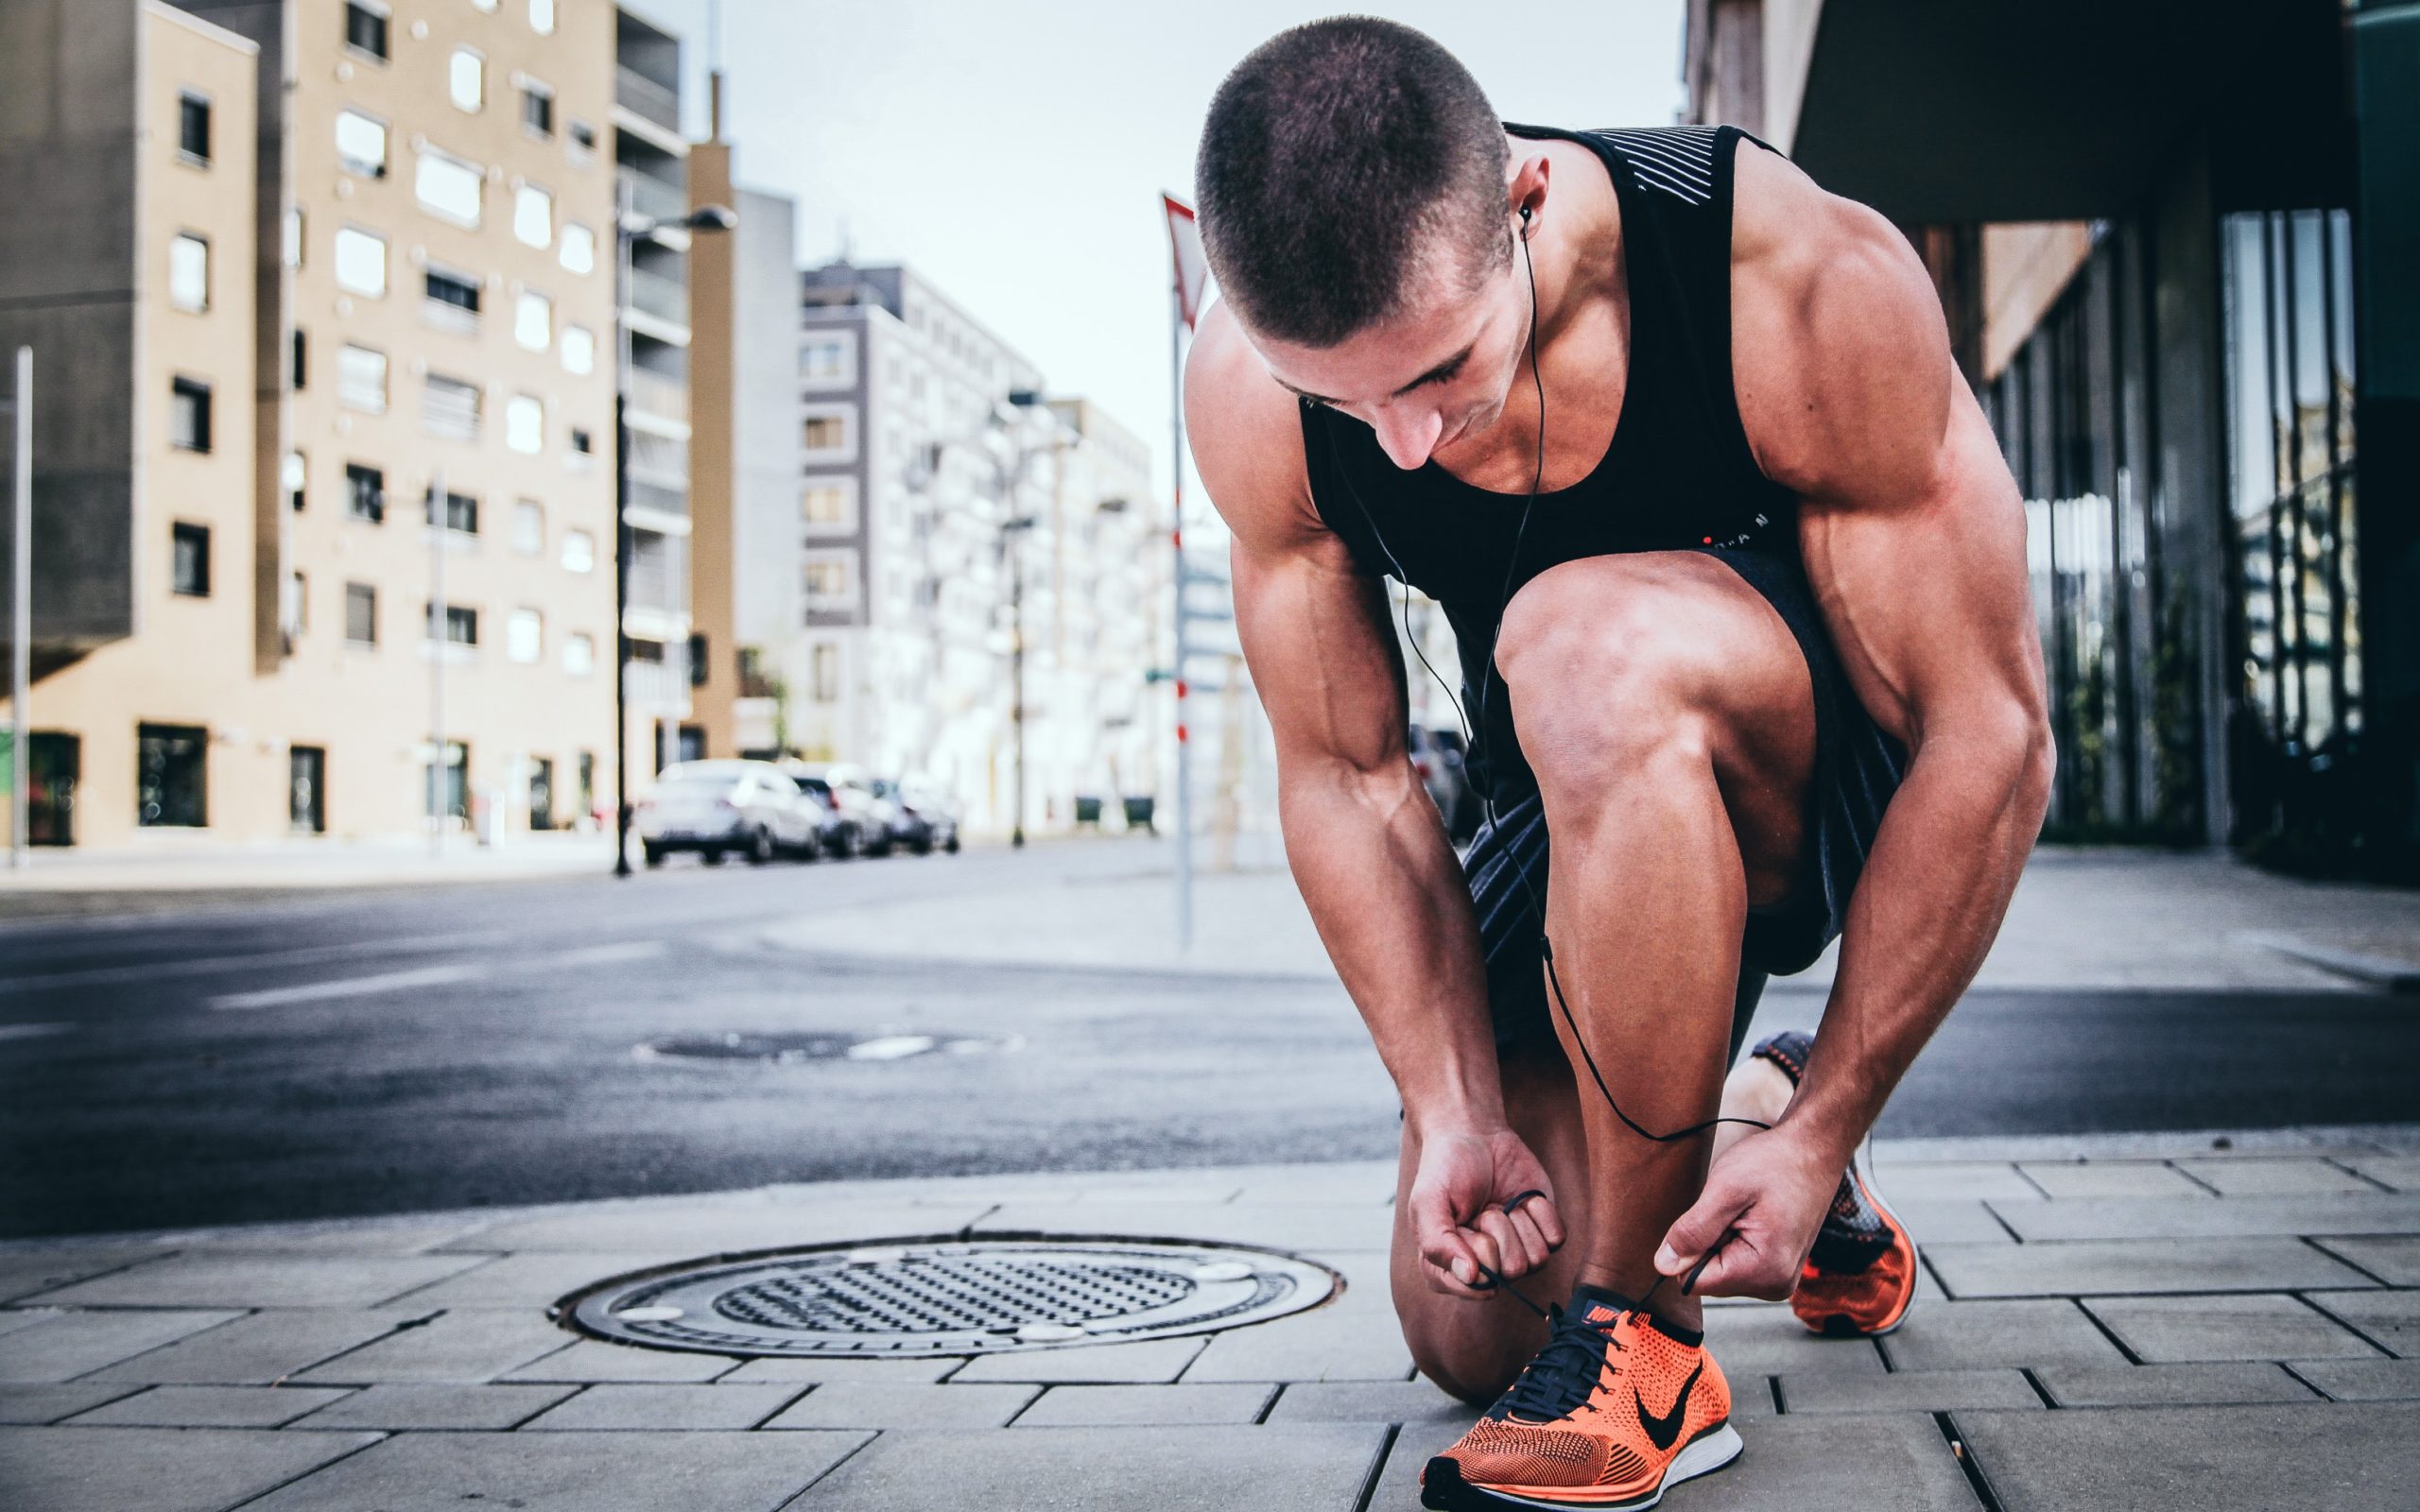 Image of a runner tying his shoe.